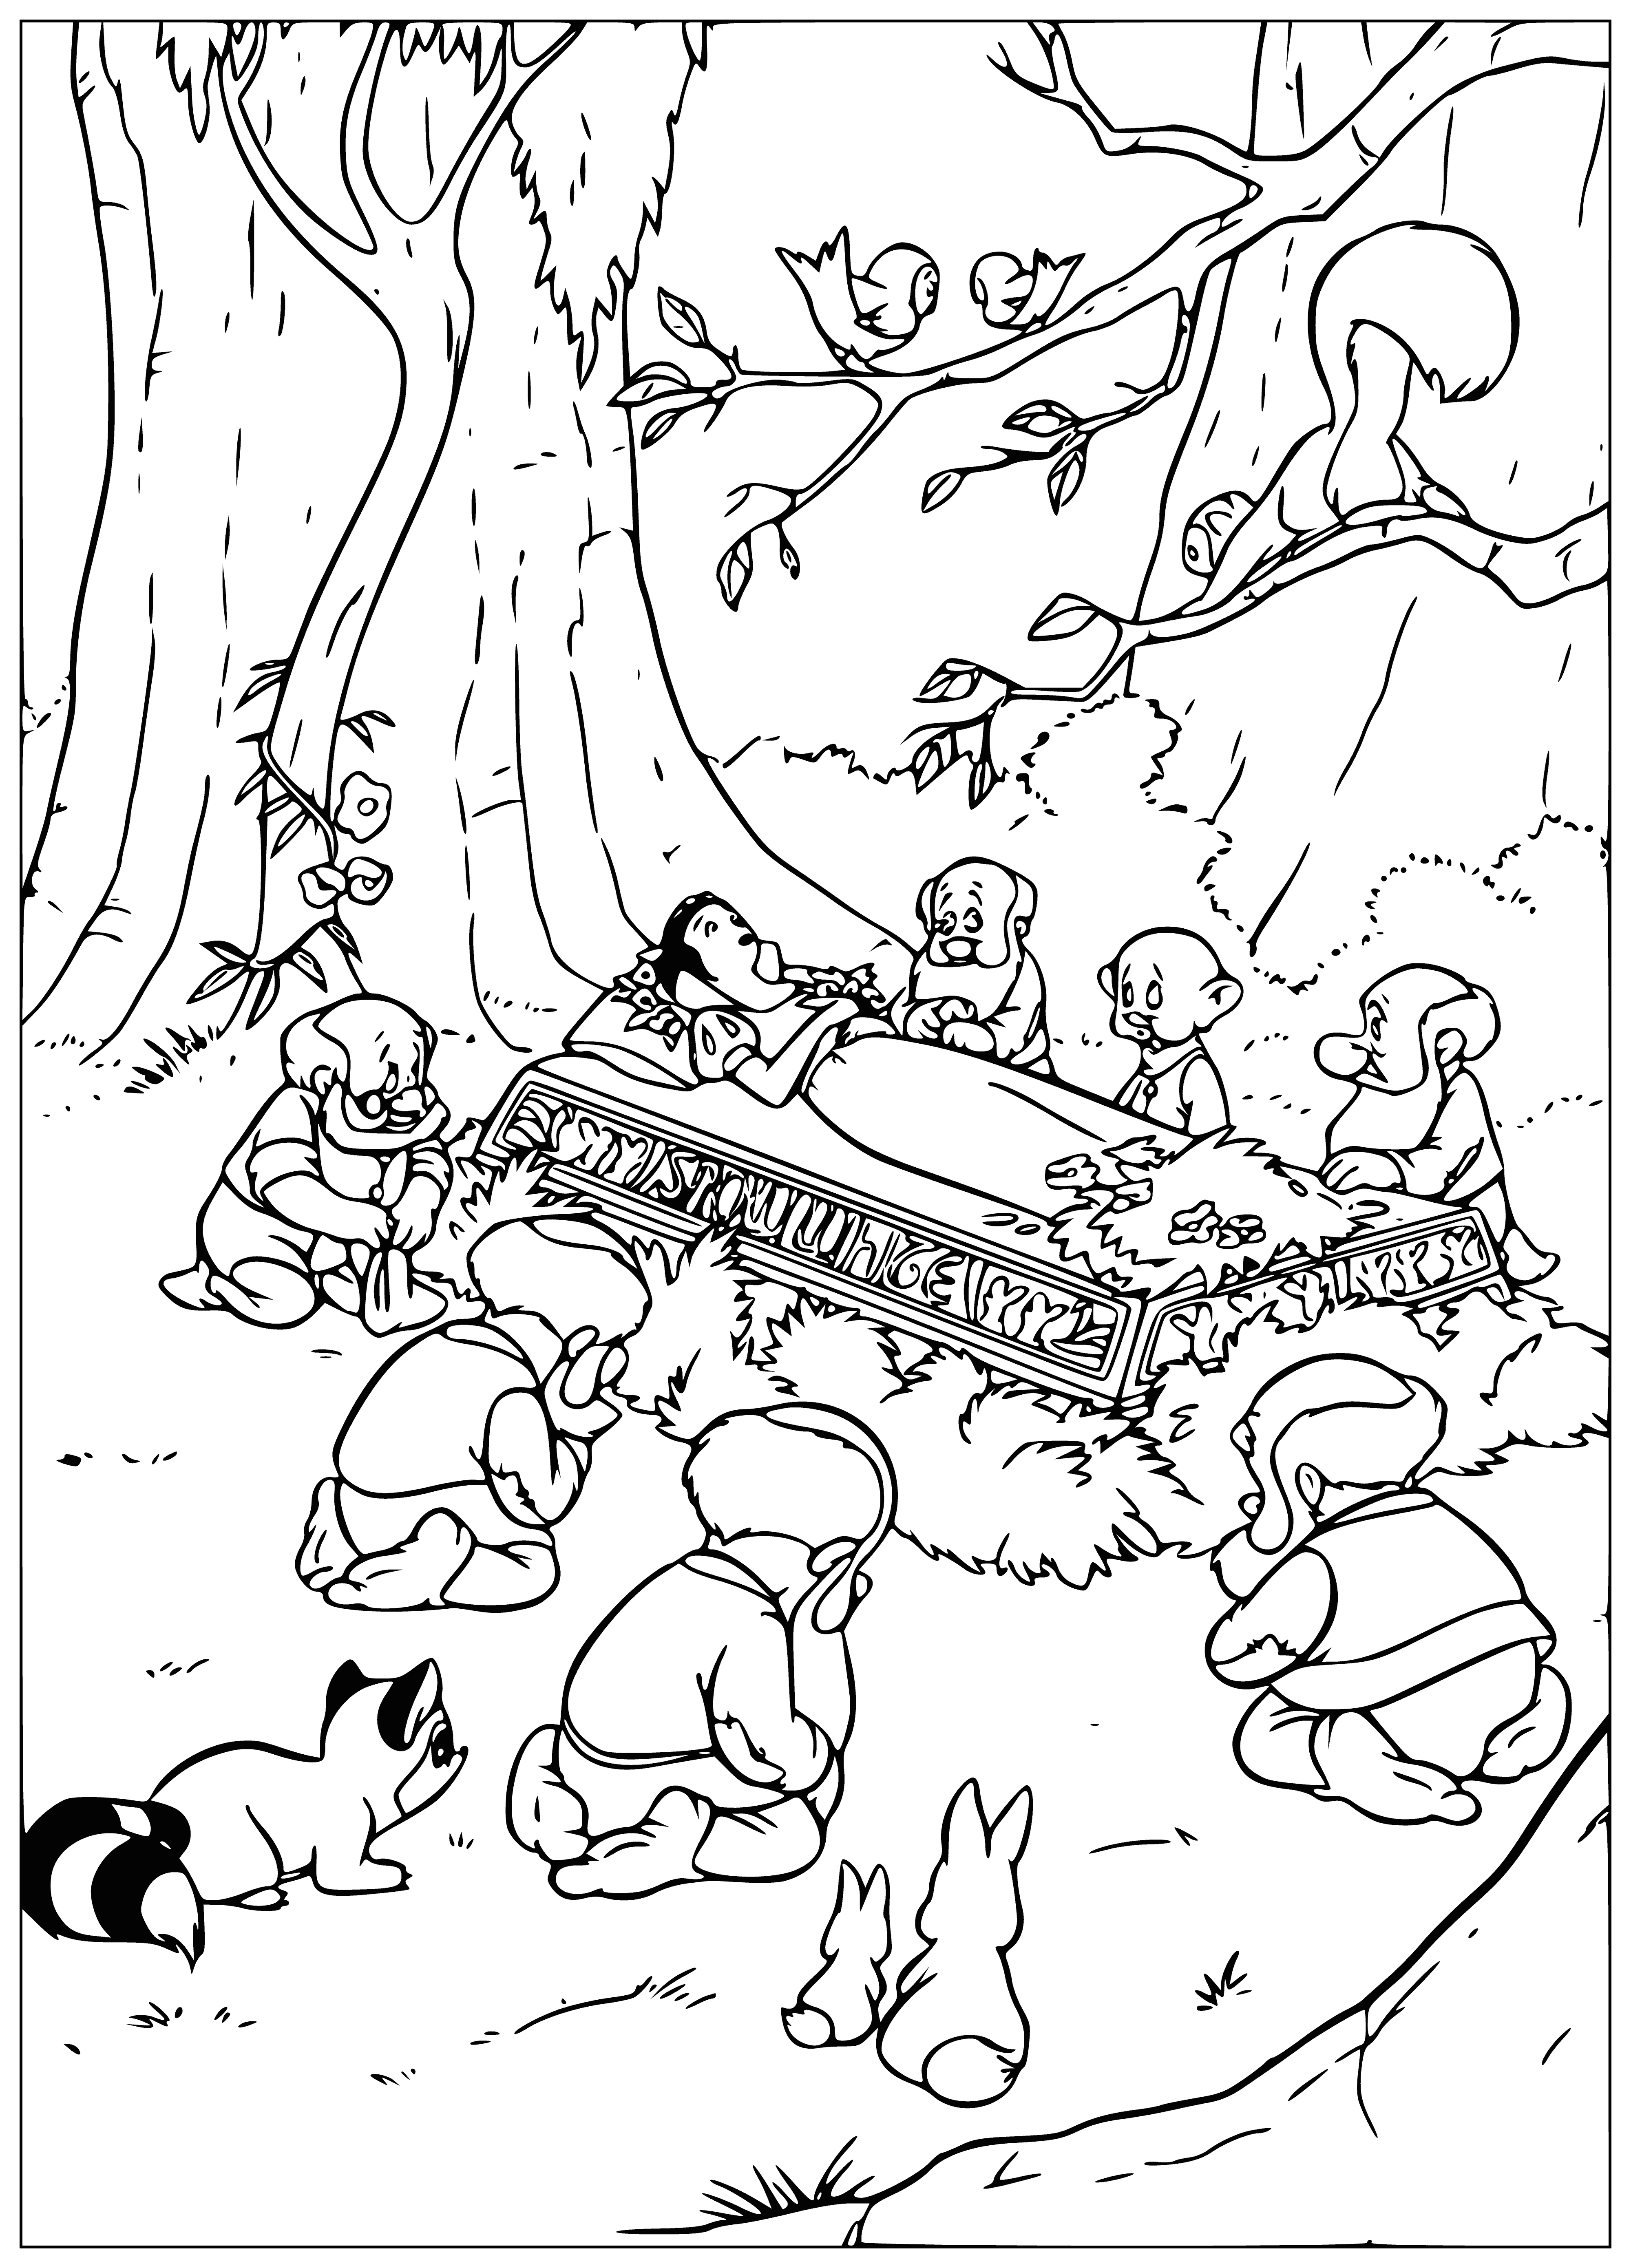 coloring page: Snow White found seven friendly dwarves in the forest who welcomed her with a fresh start.